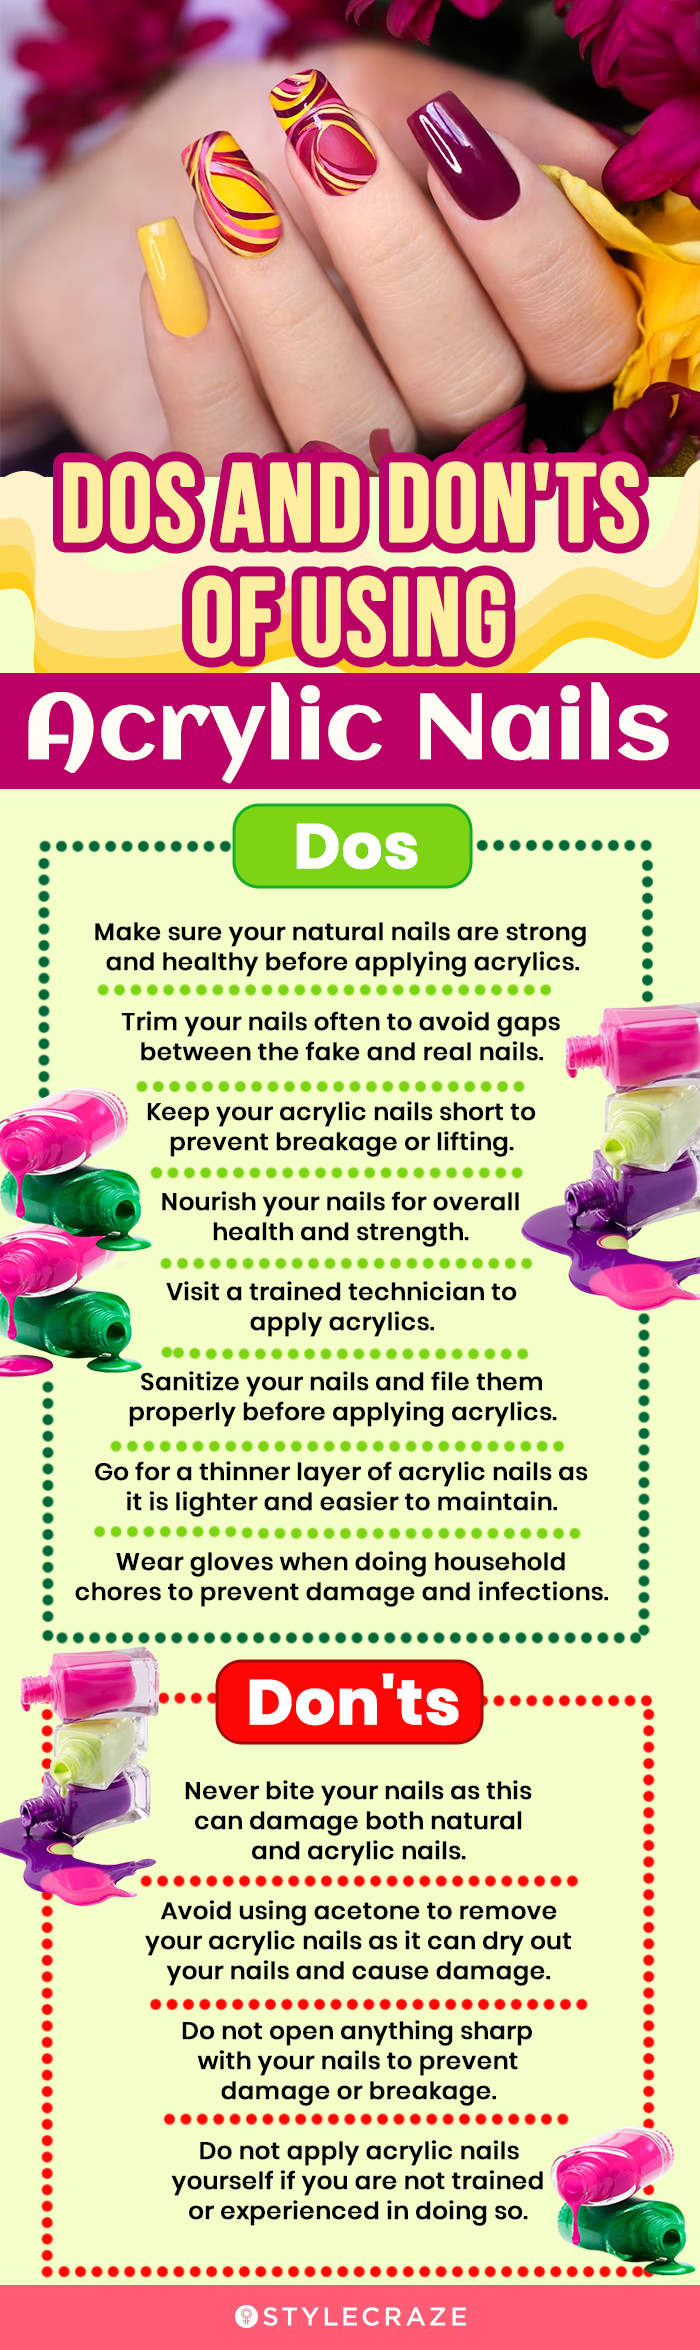 Dos And Don'ts Of Using Acrylic Nails (infographic)